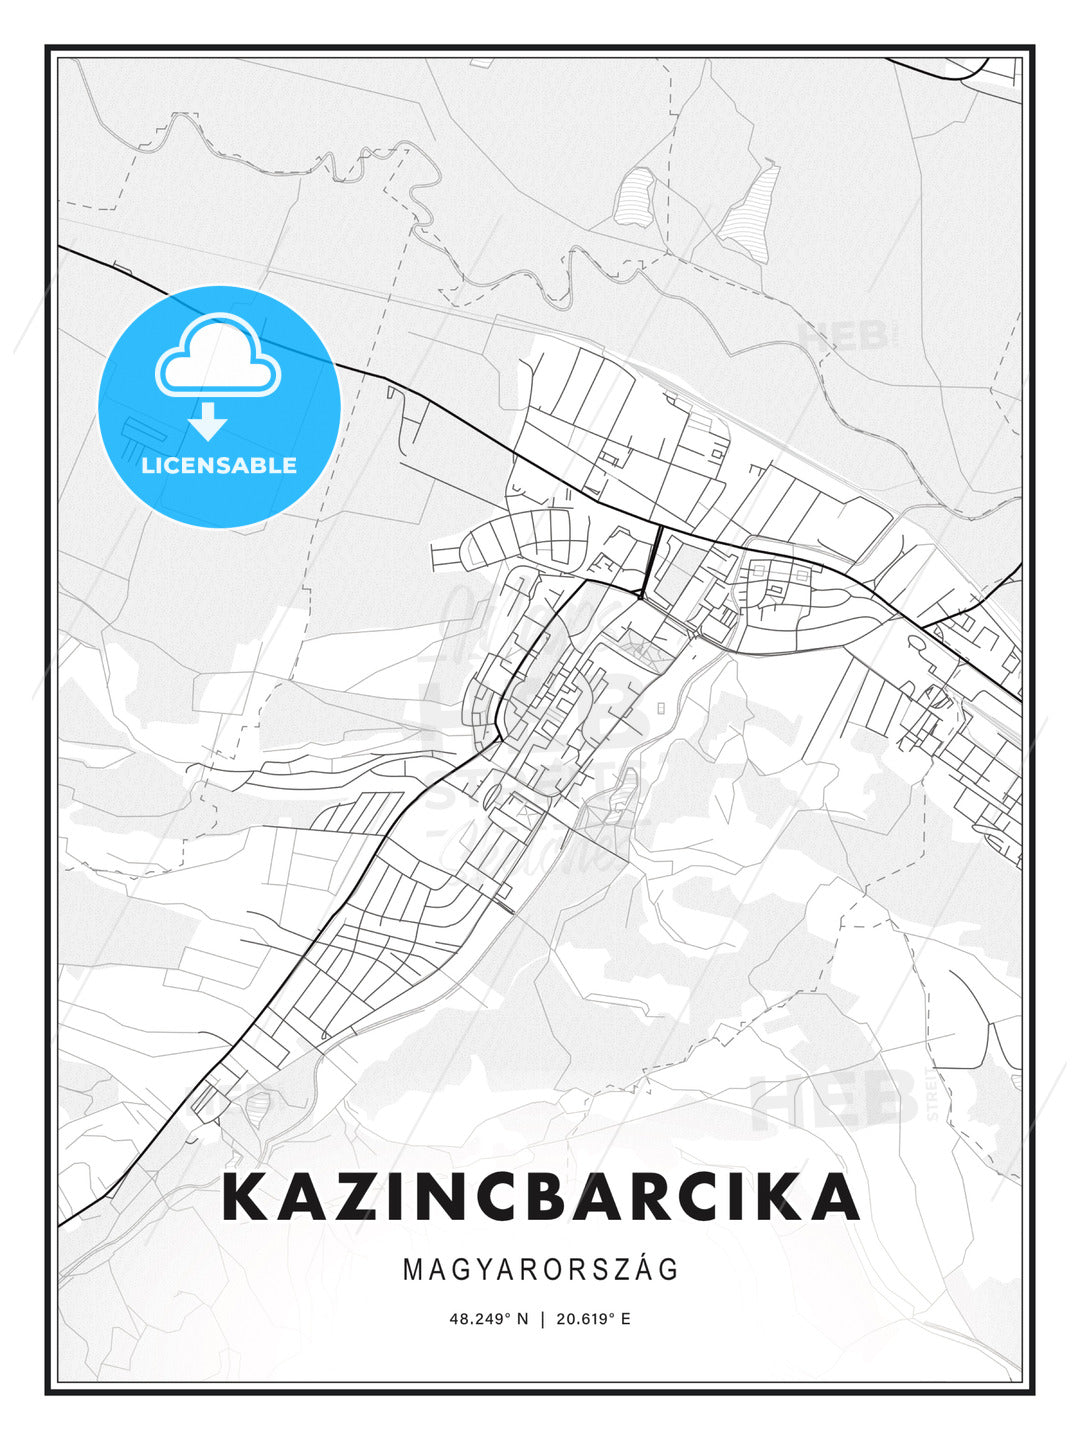 Kazincbarcika, Hungary, Modern Print Template in Various Formats - HEBSTREITS Sketches